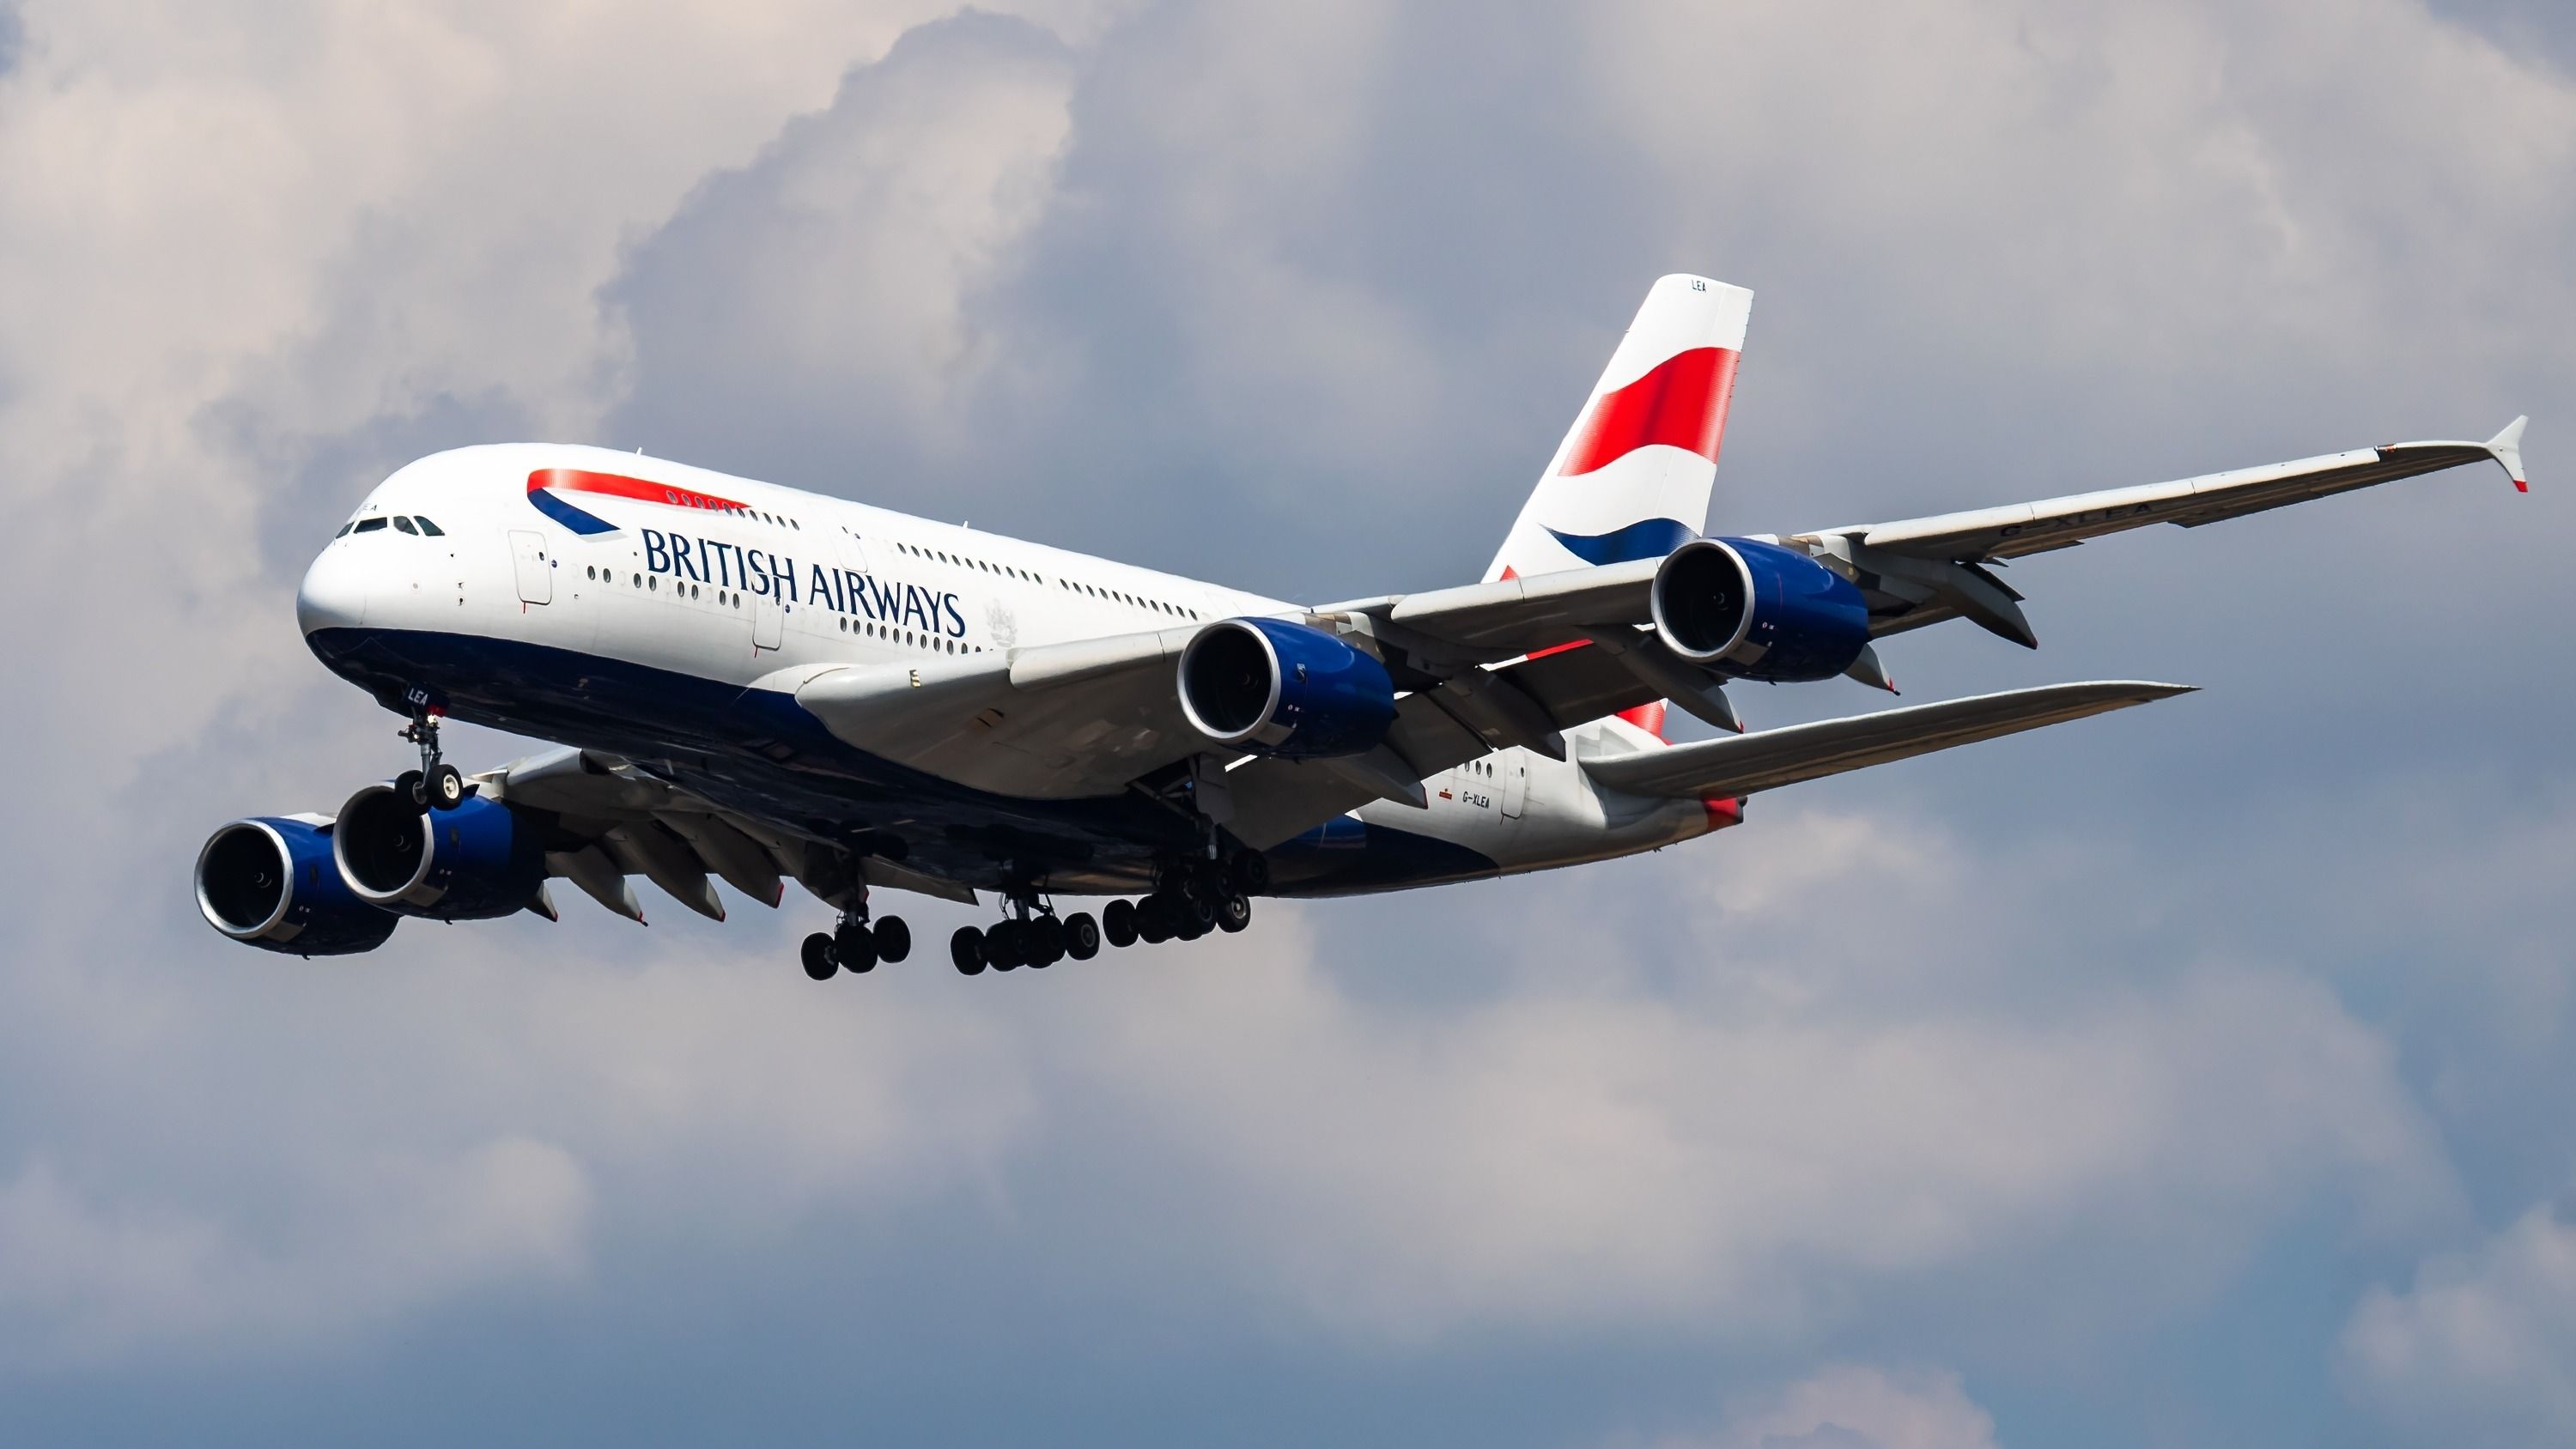 Where Does The Airbus A380 Fly To In The US?